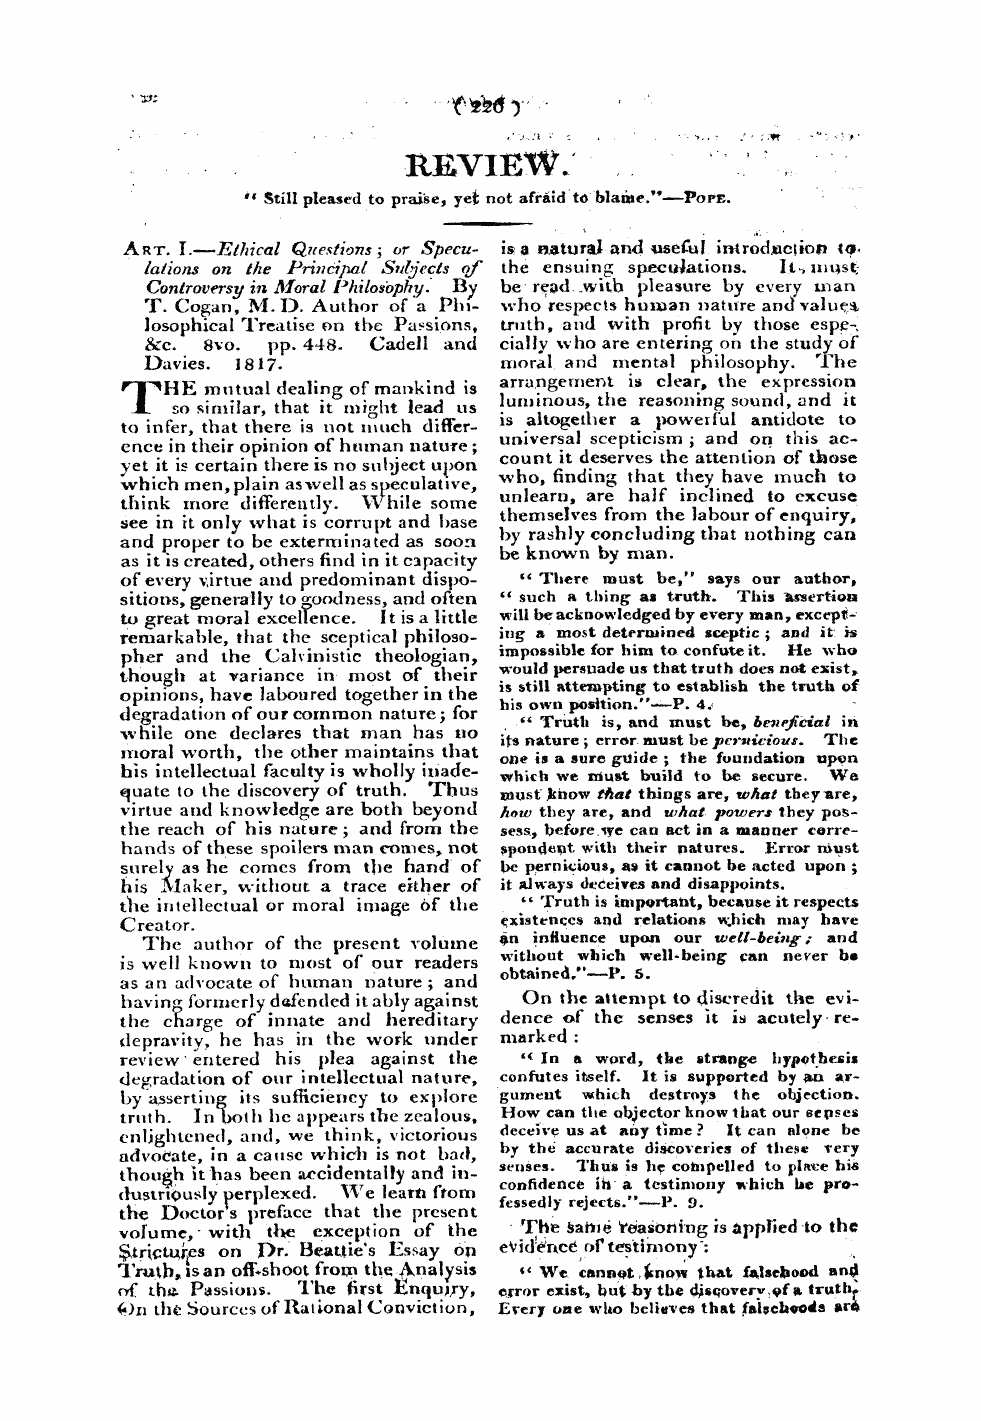 Monthly Repository (1806-1838) and Unitarian Chronicle (1832-1833): F Y, 1st edition: 34